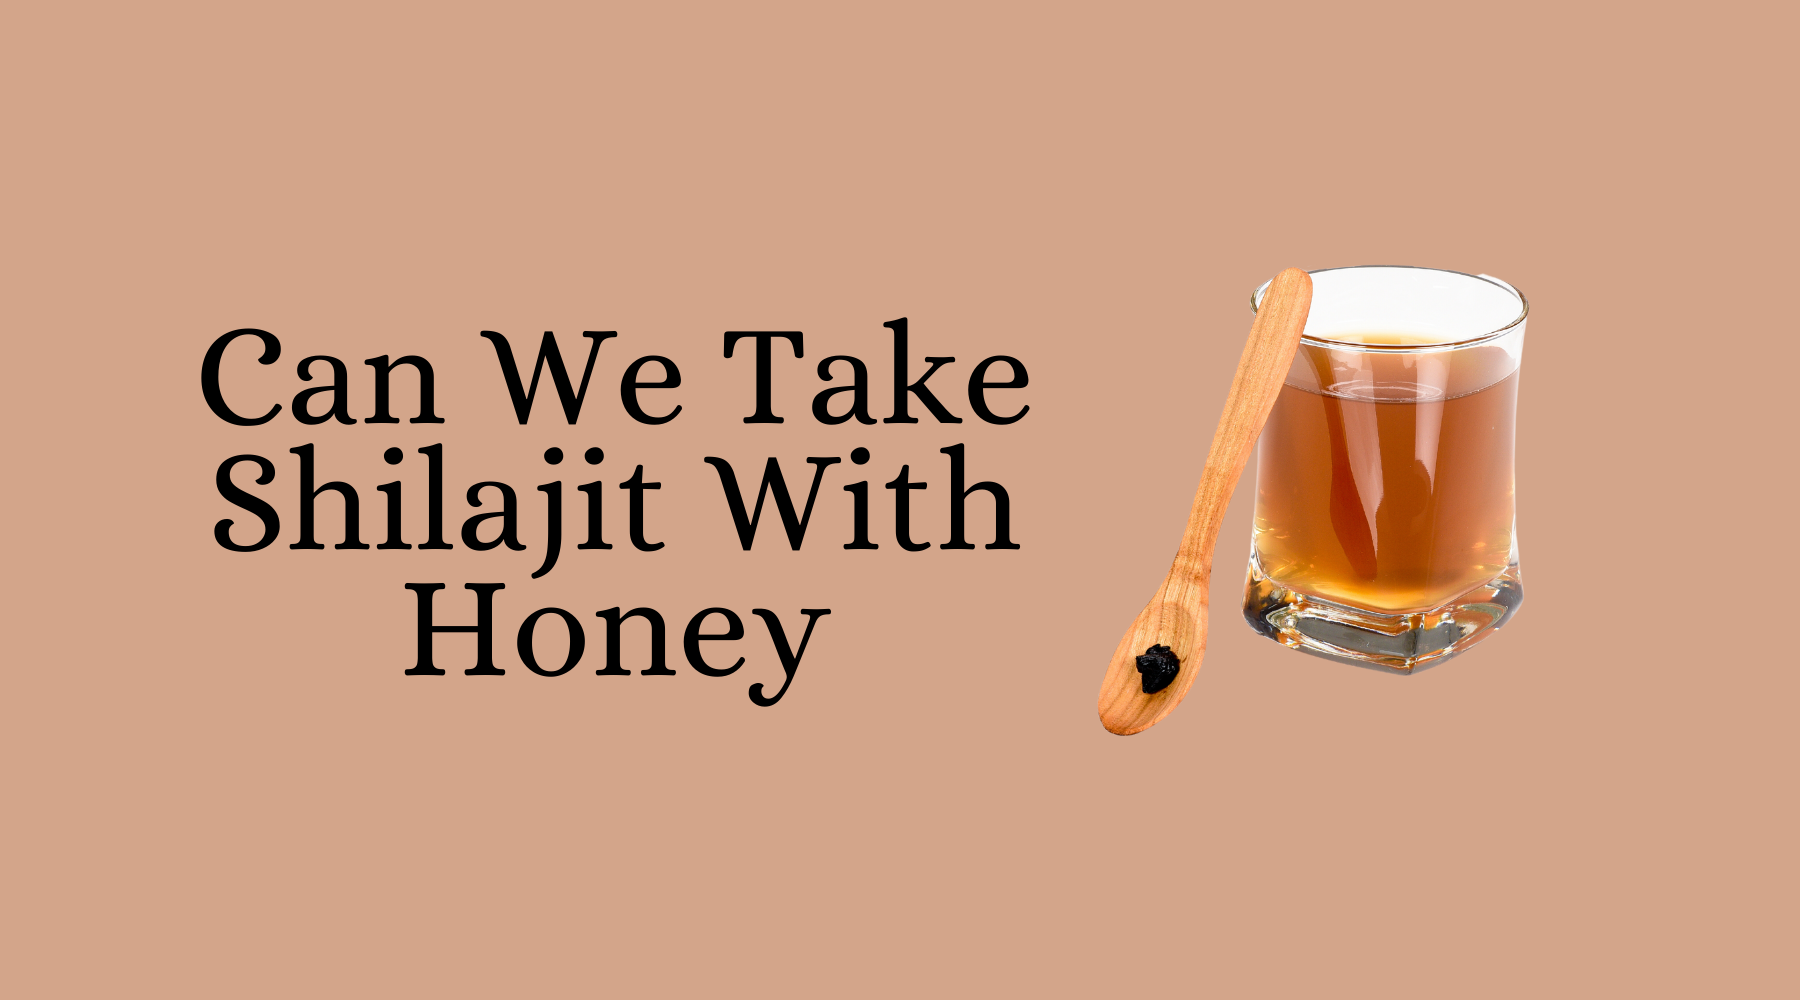 Can We Take Shilajit With Honey